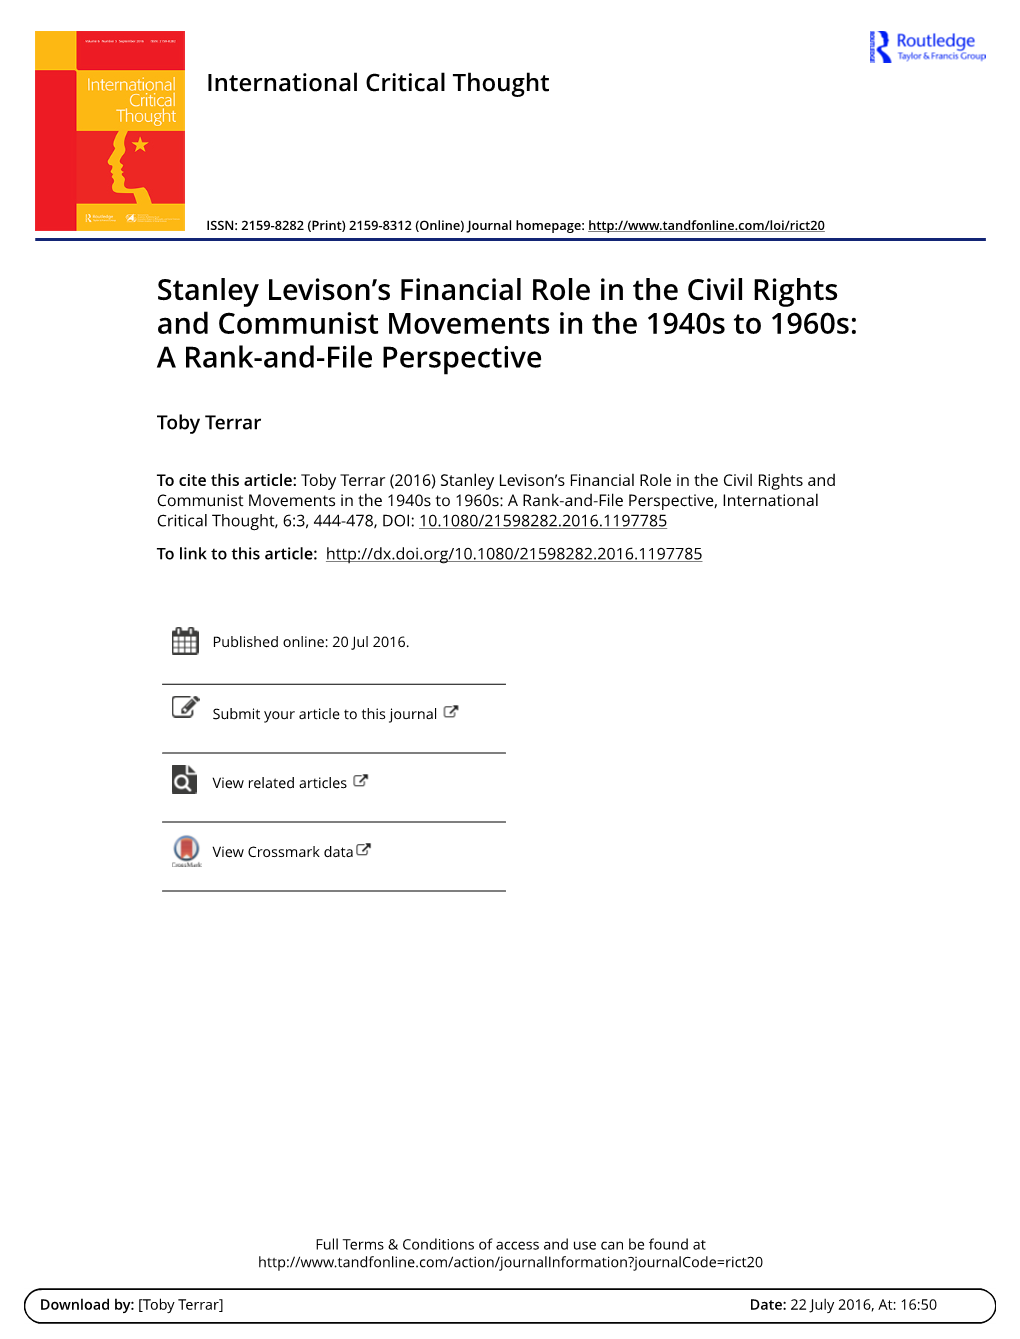 Stanley Levison's Financial Role in the Civil Rights